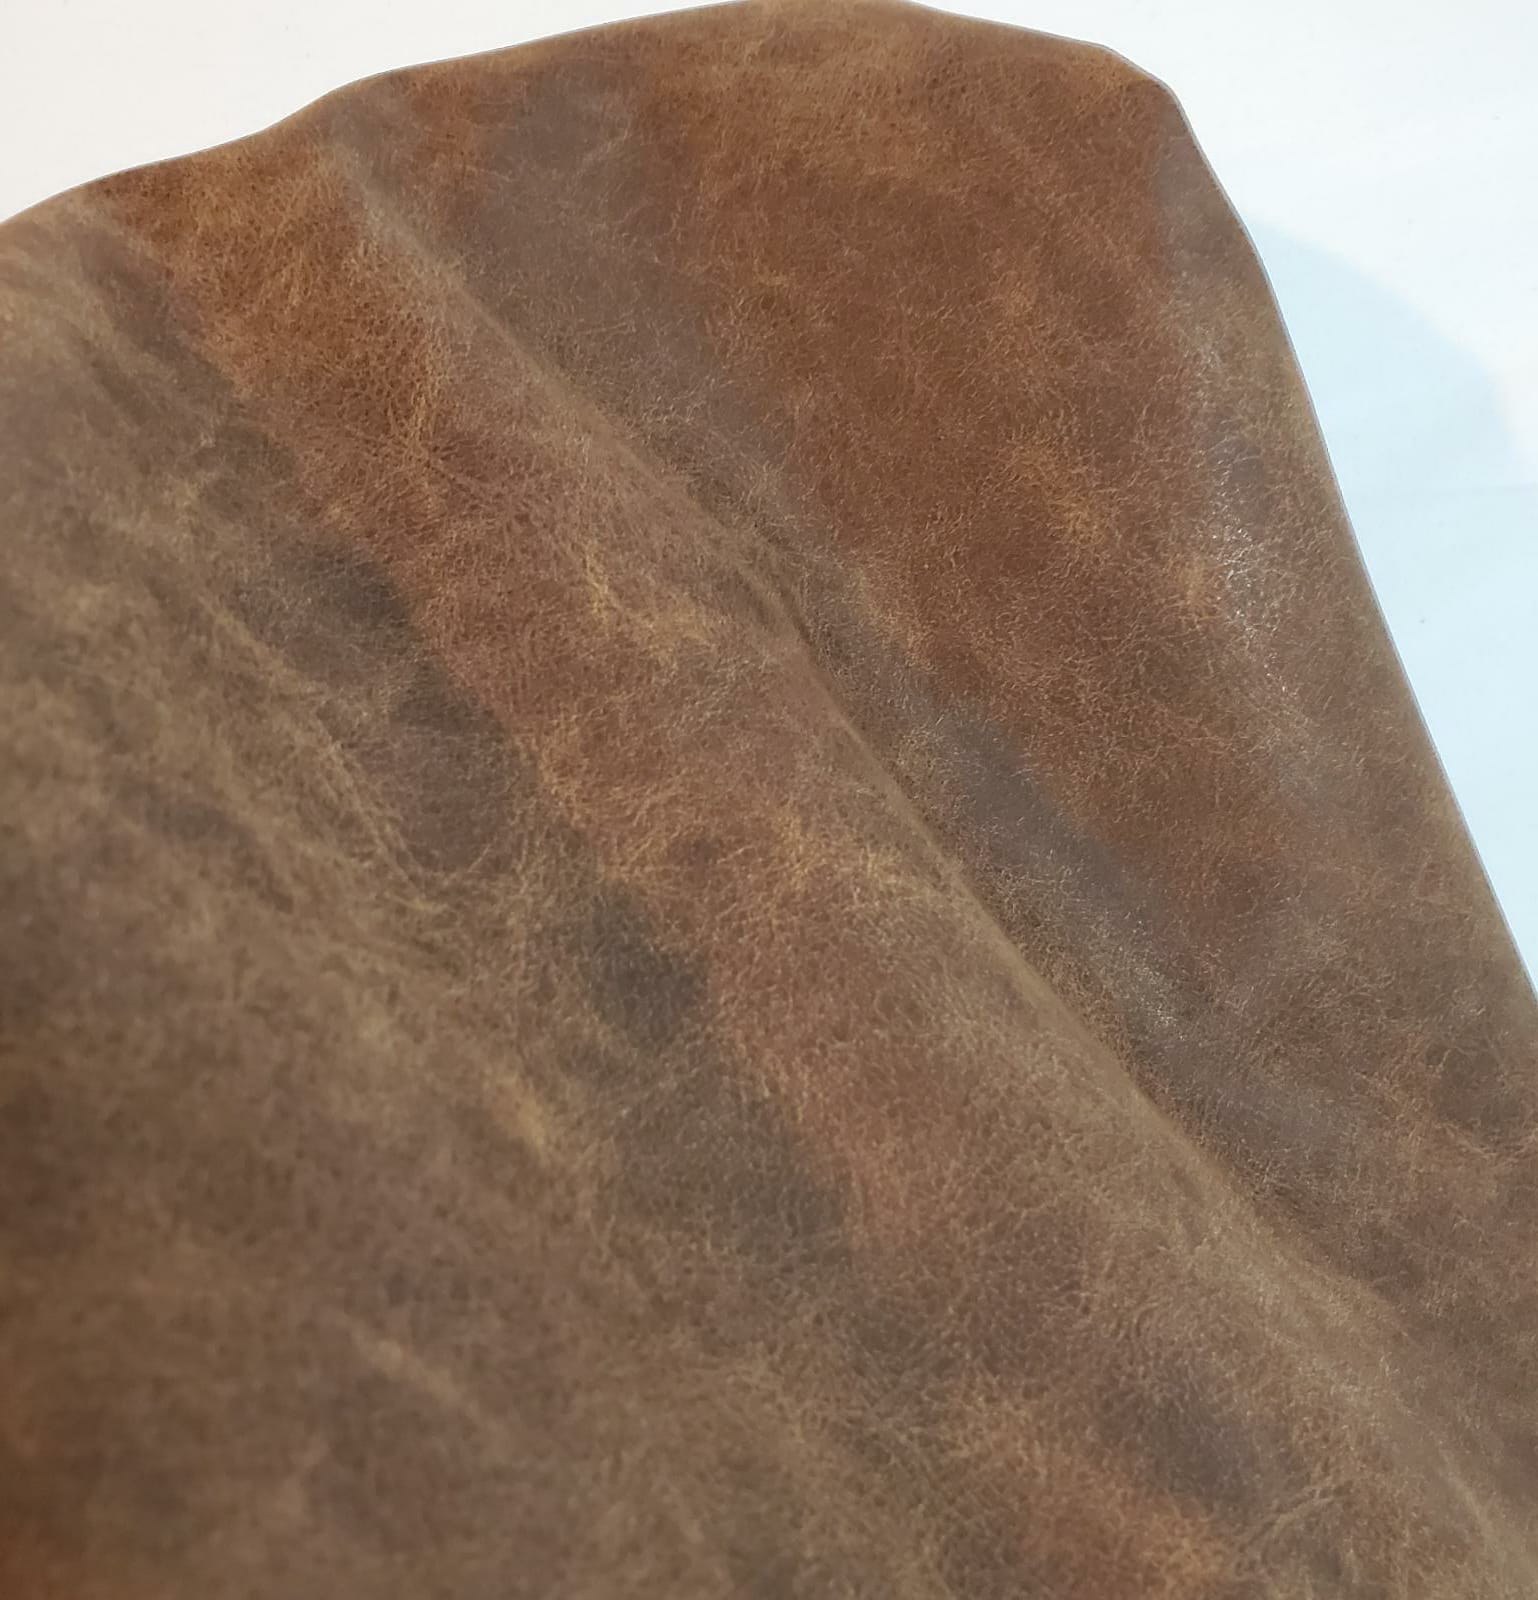 brown leather material